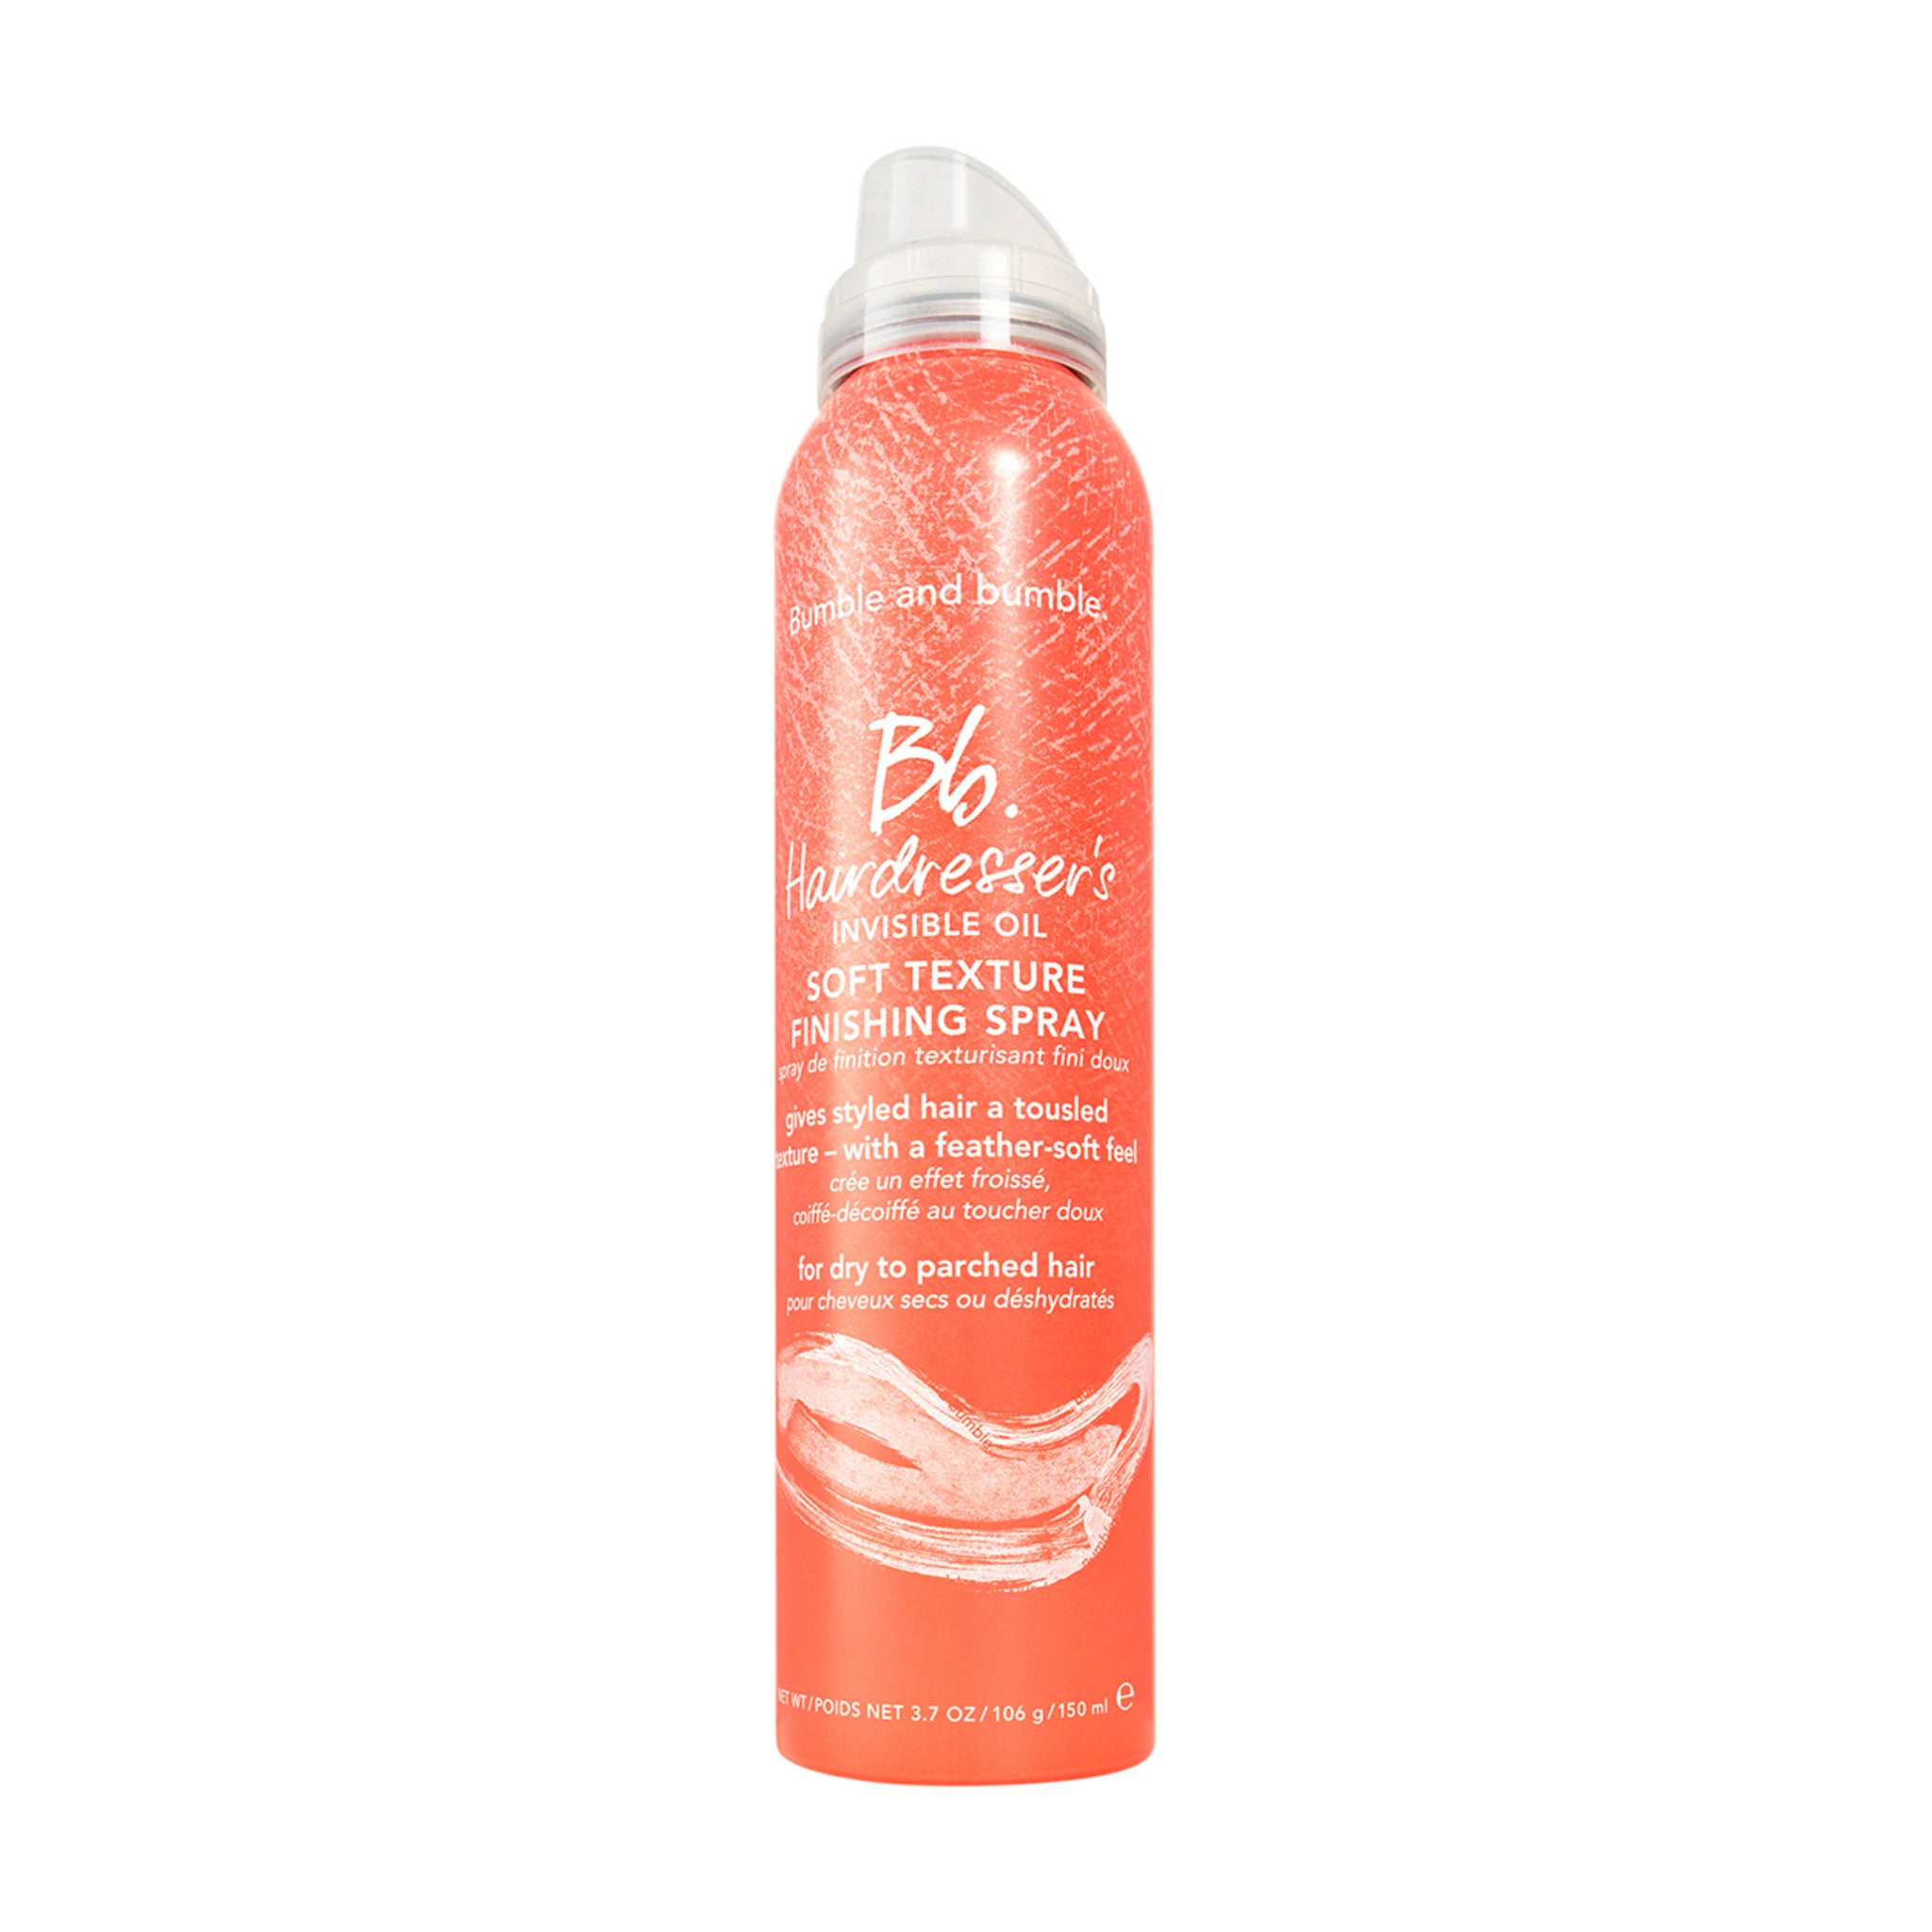 Hairdresser's Invisible Oil Soft Texture Finishing Spray main image.